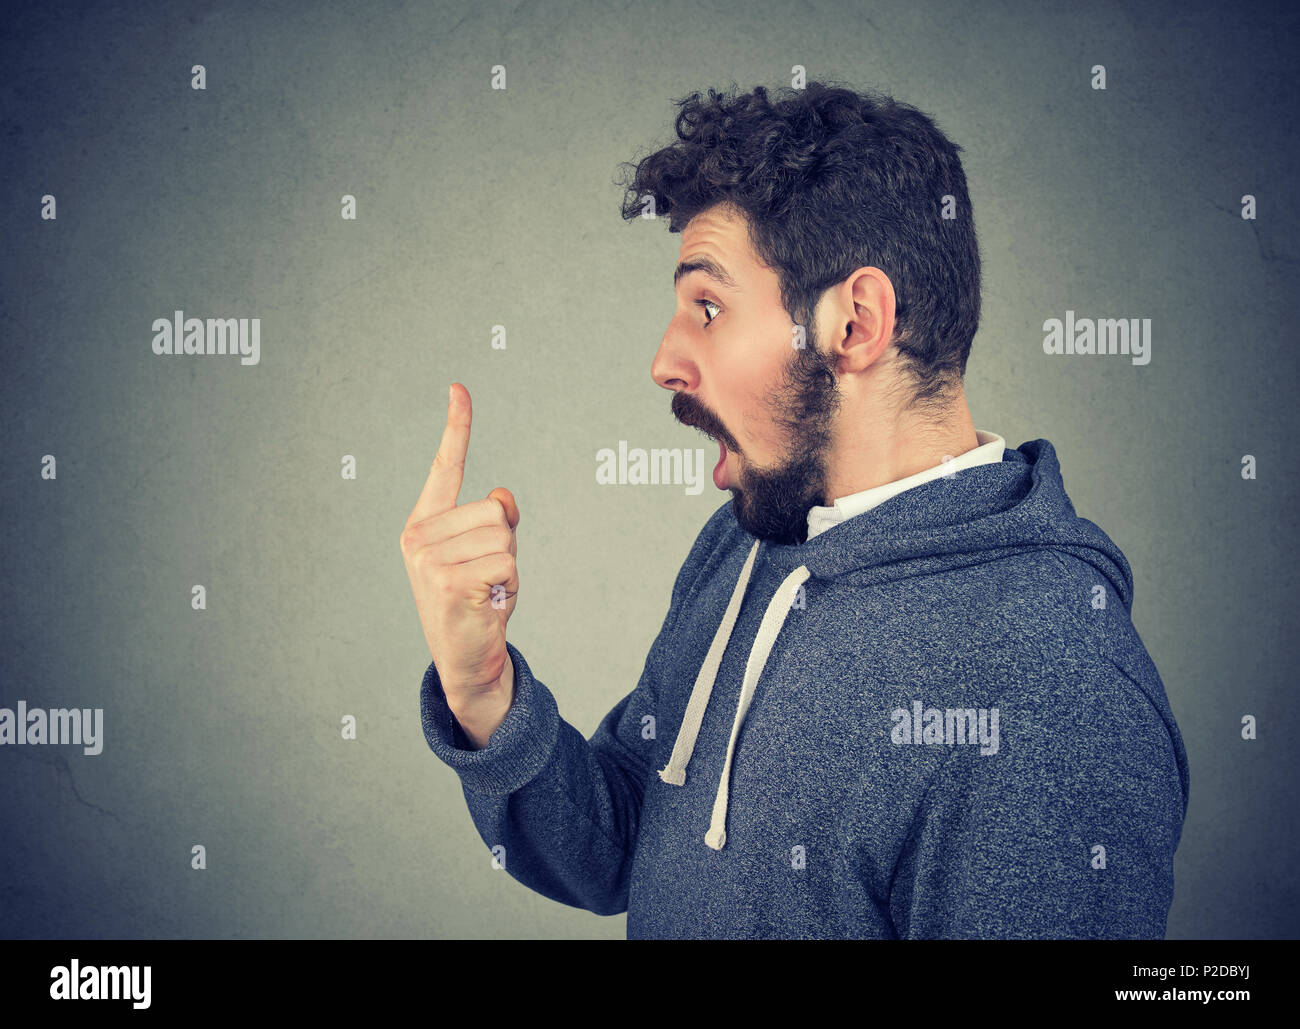 Side view of drunk man looking at forefinger in illusion looking super stunned on gray background Stock Photo